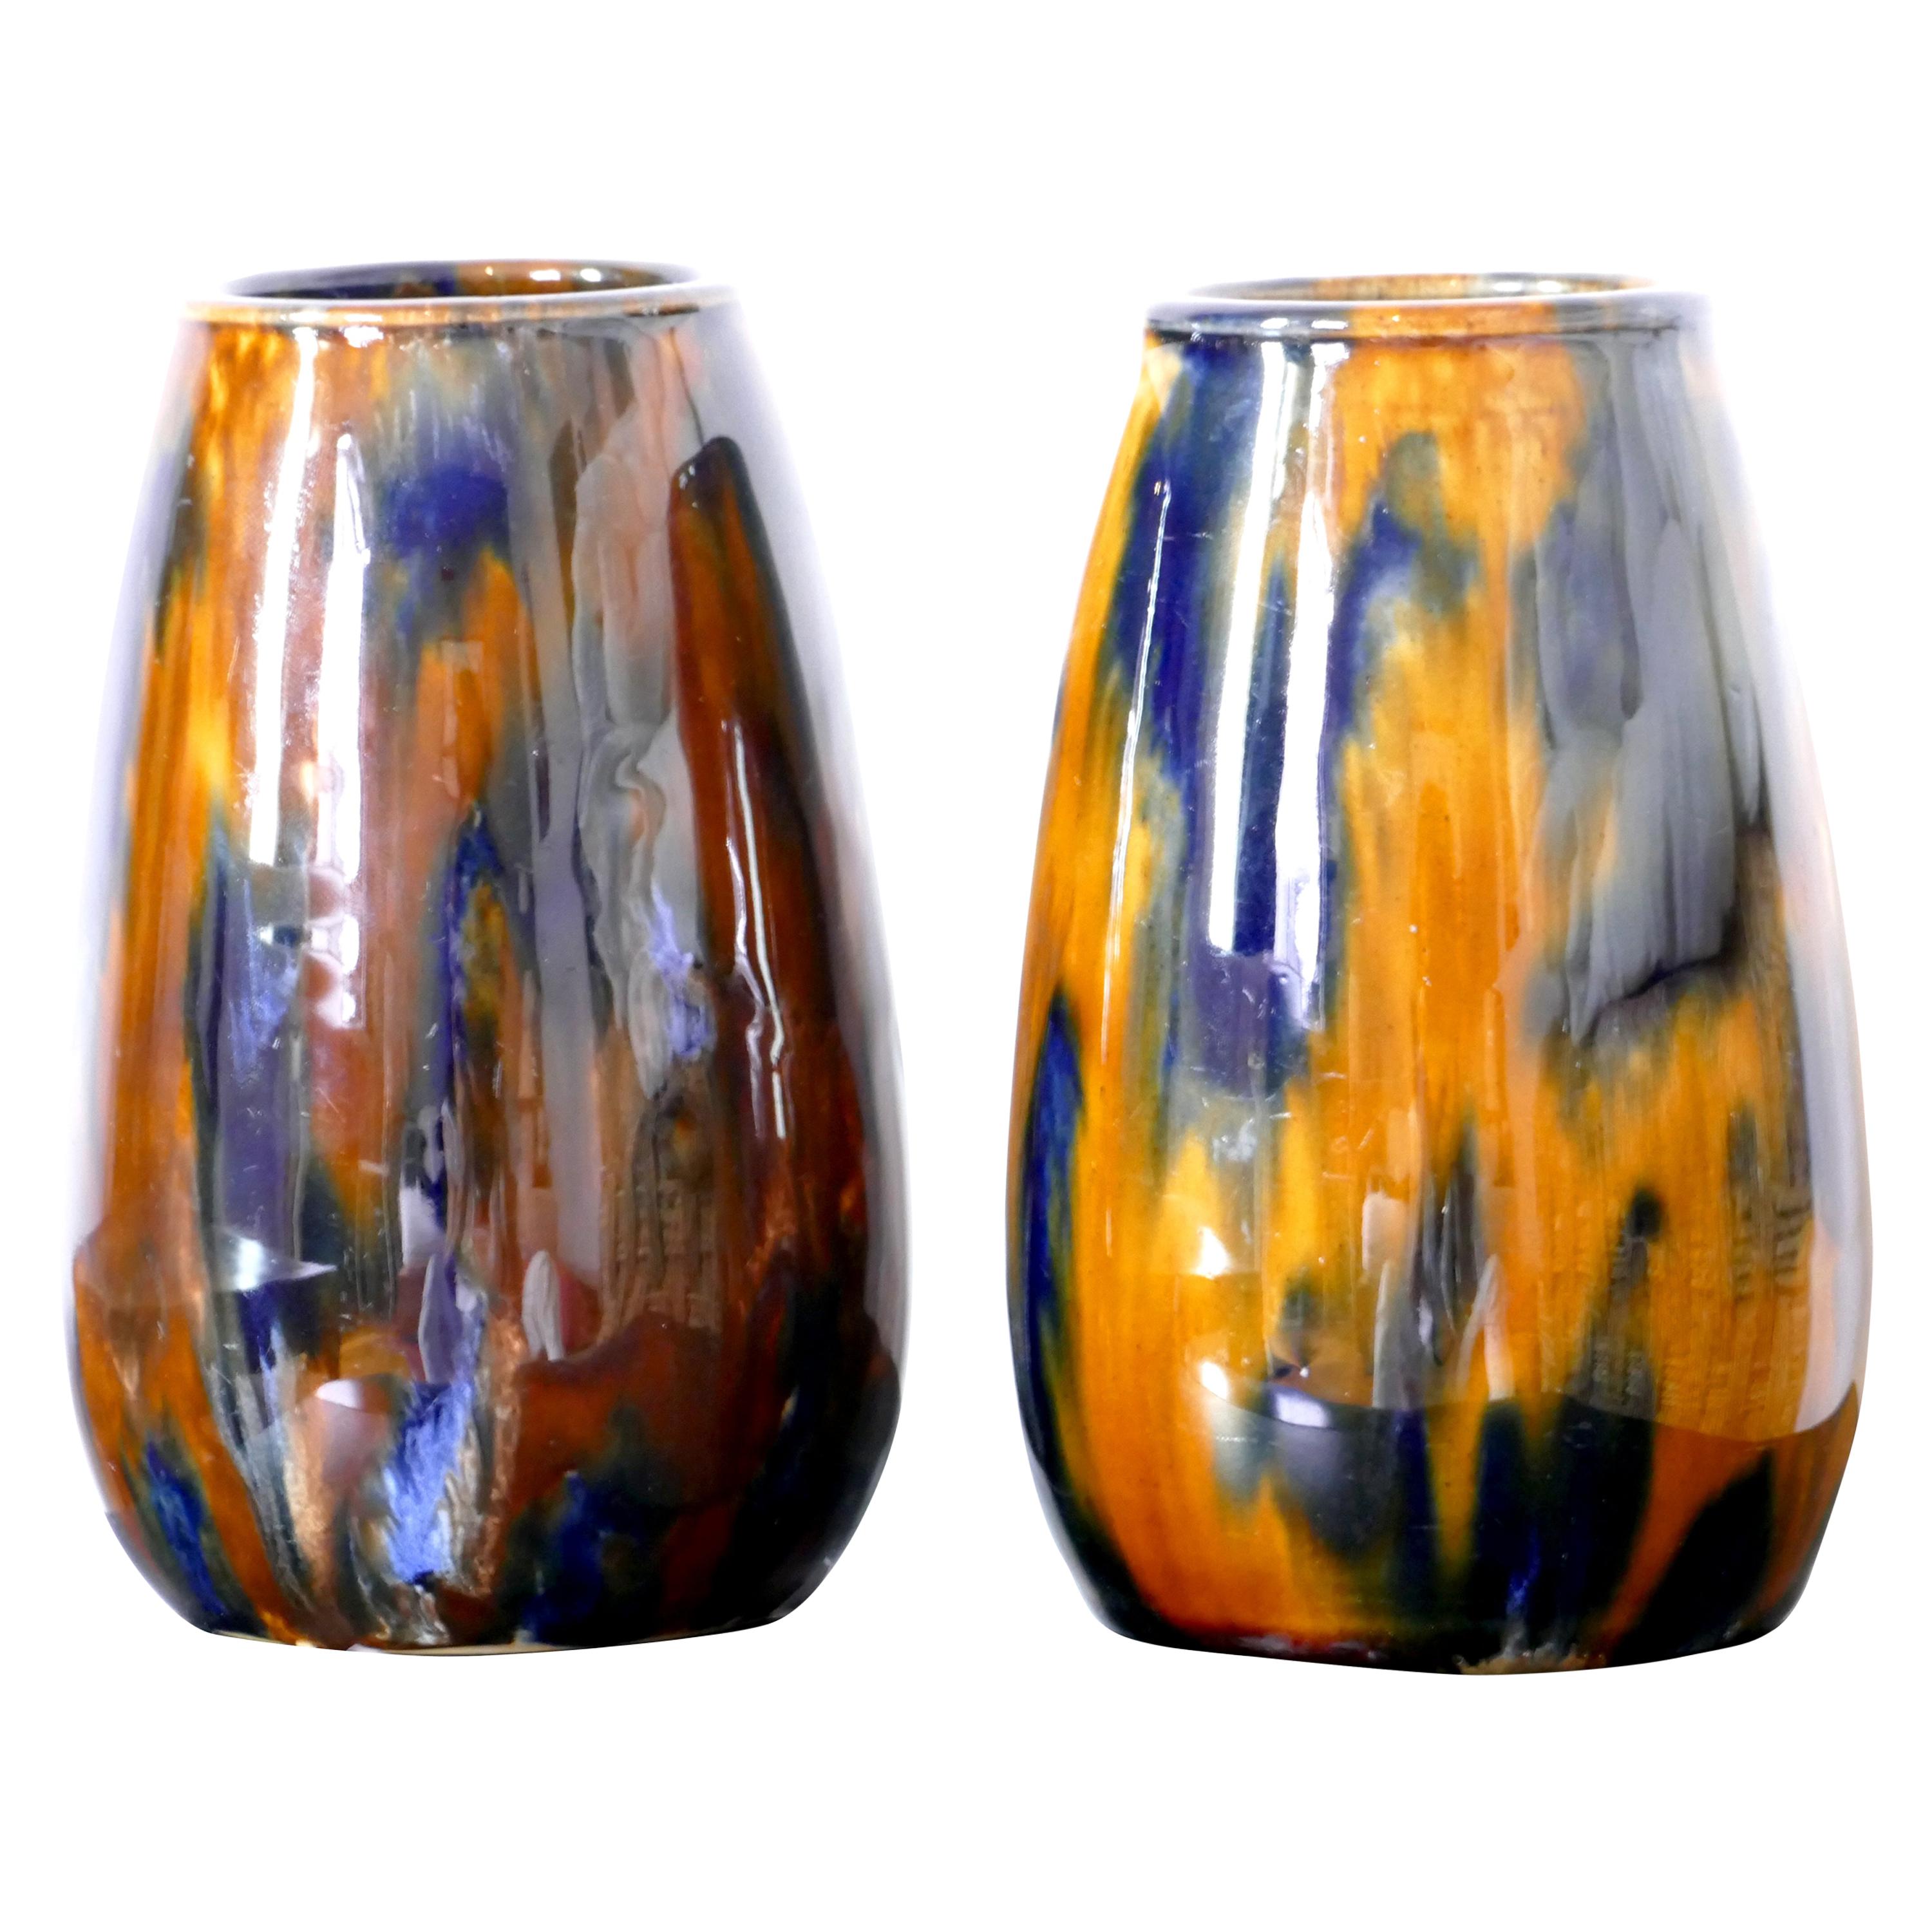 Vintage Pair of Polychrome Vases by G.H. Richard London Matlock, Late 1900